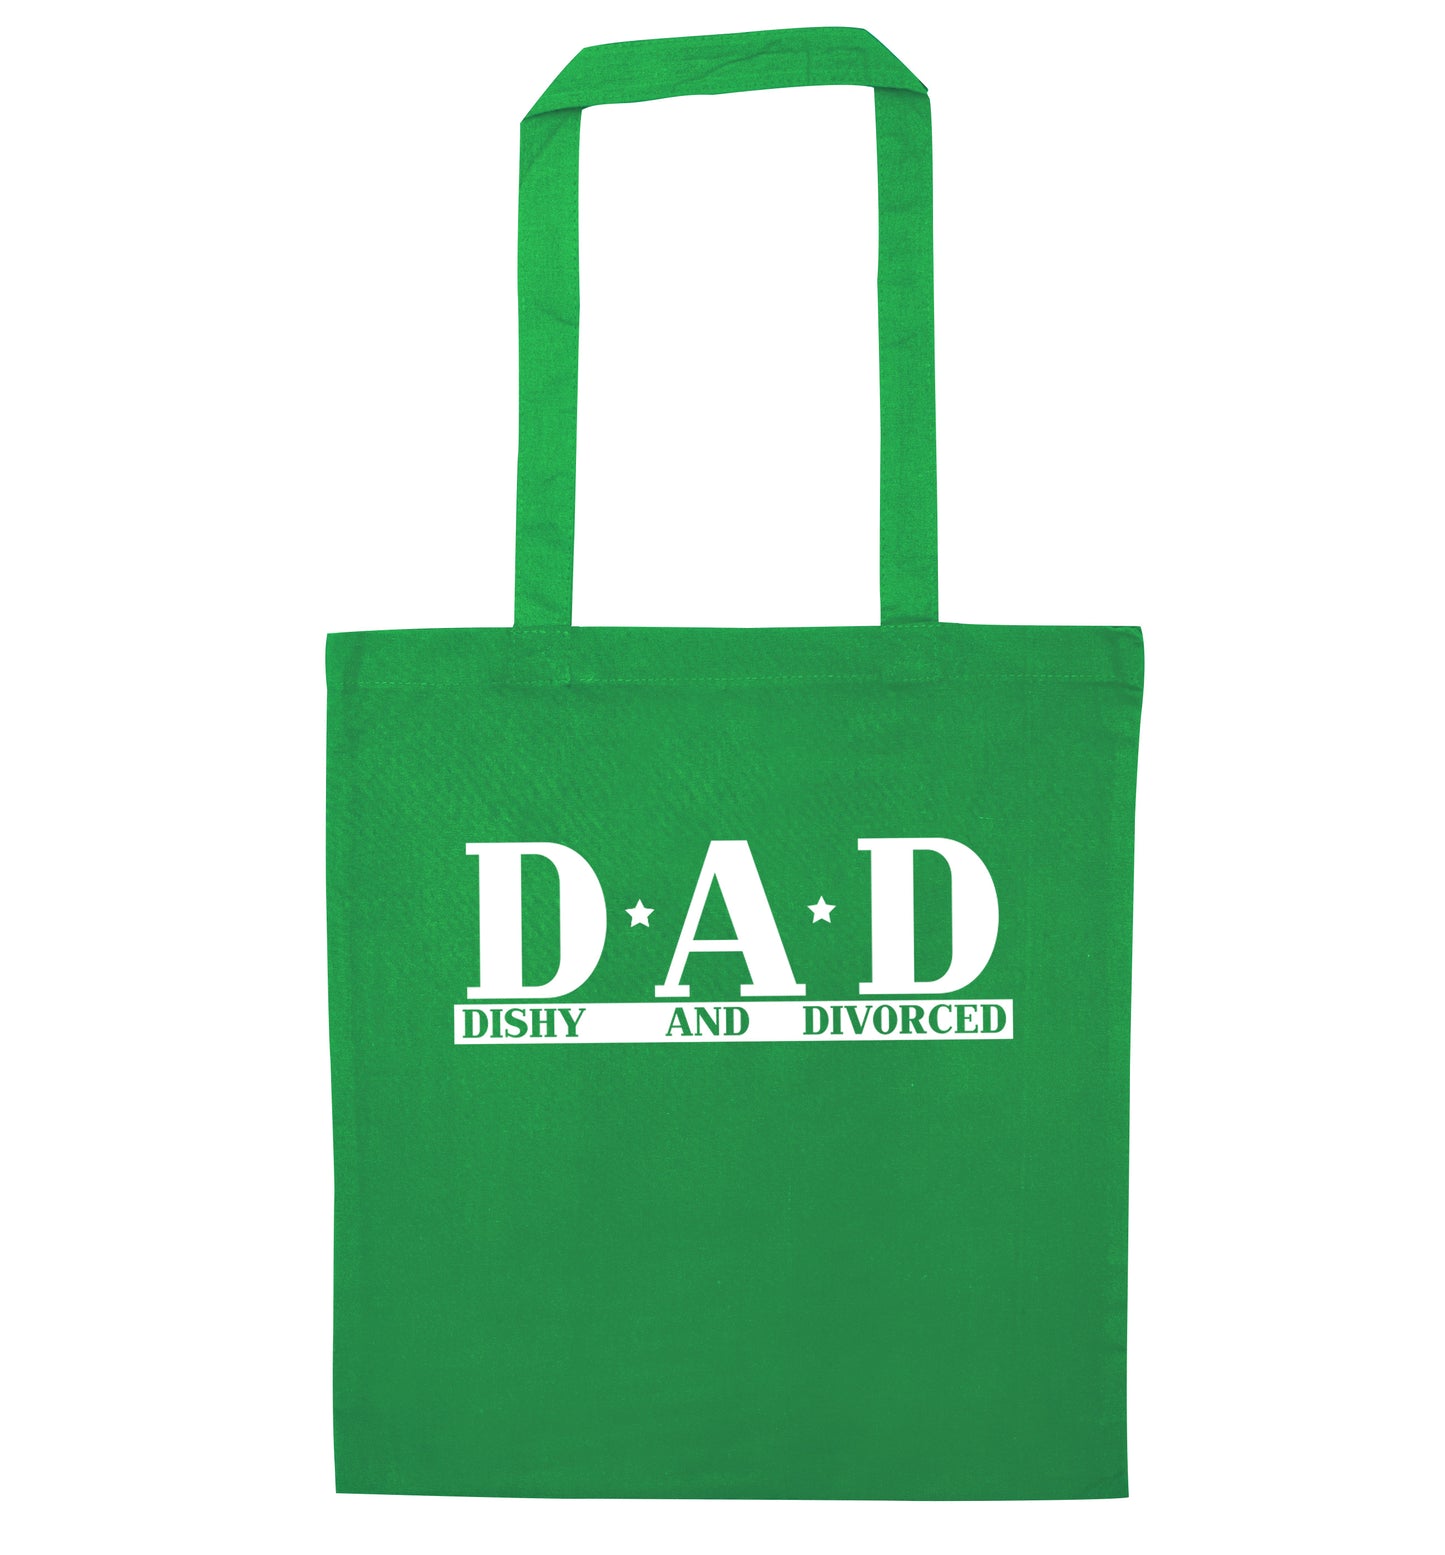 D.A.D meaning Dishy and Divorced green tote bag